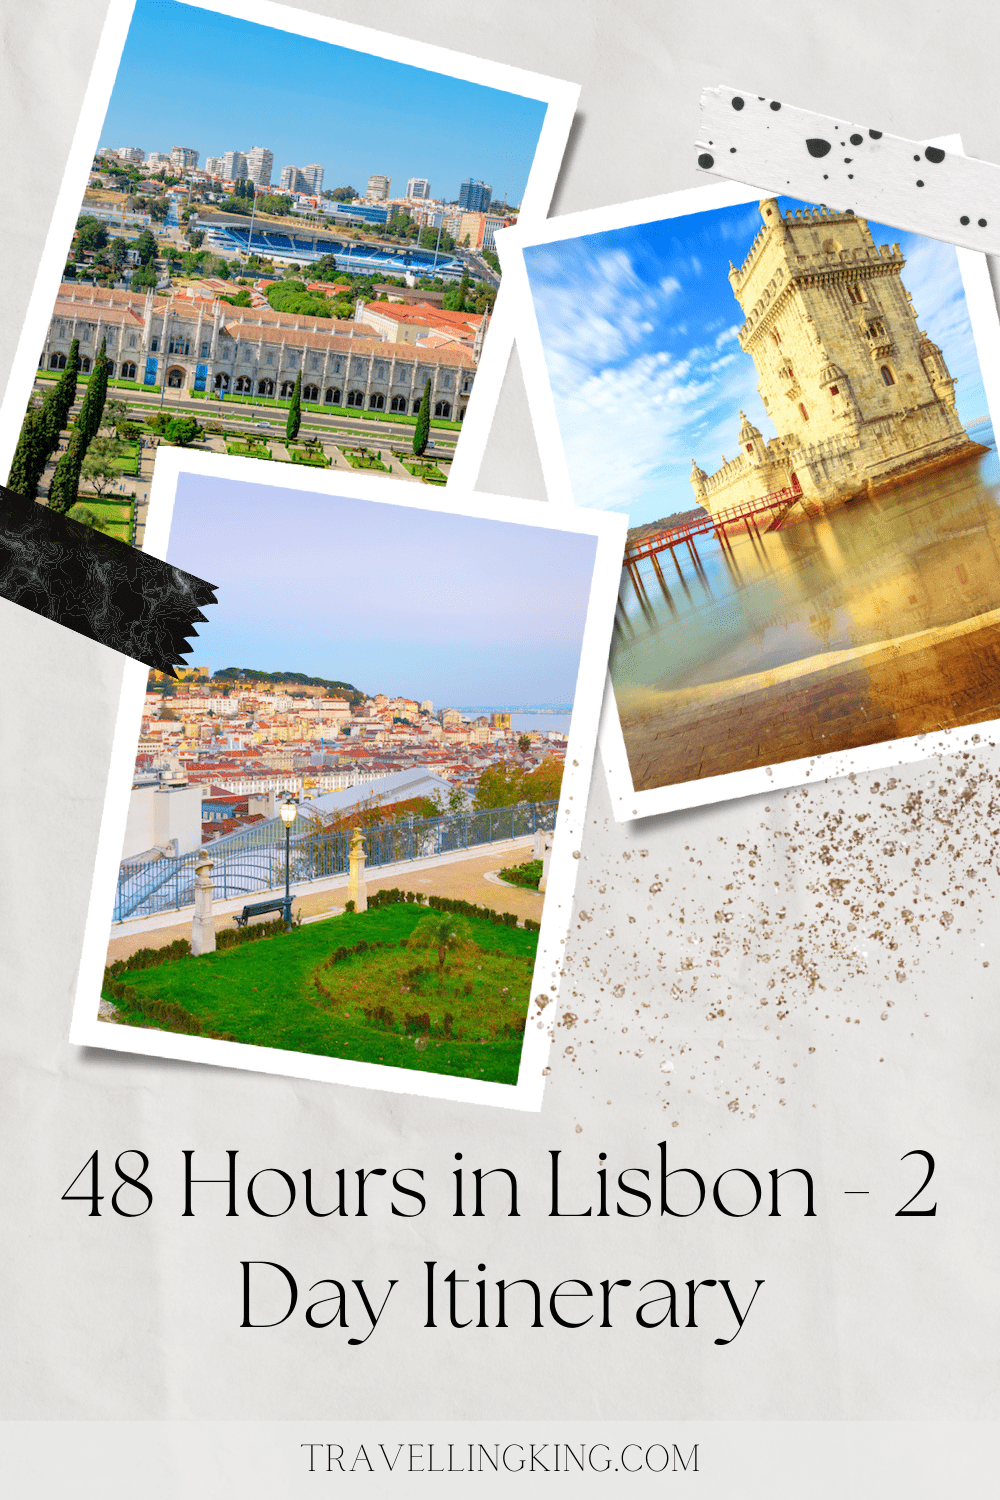 48 Hours in Lisbon - A 2 Day Itinerary